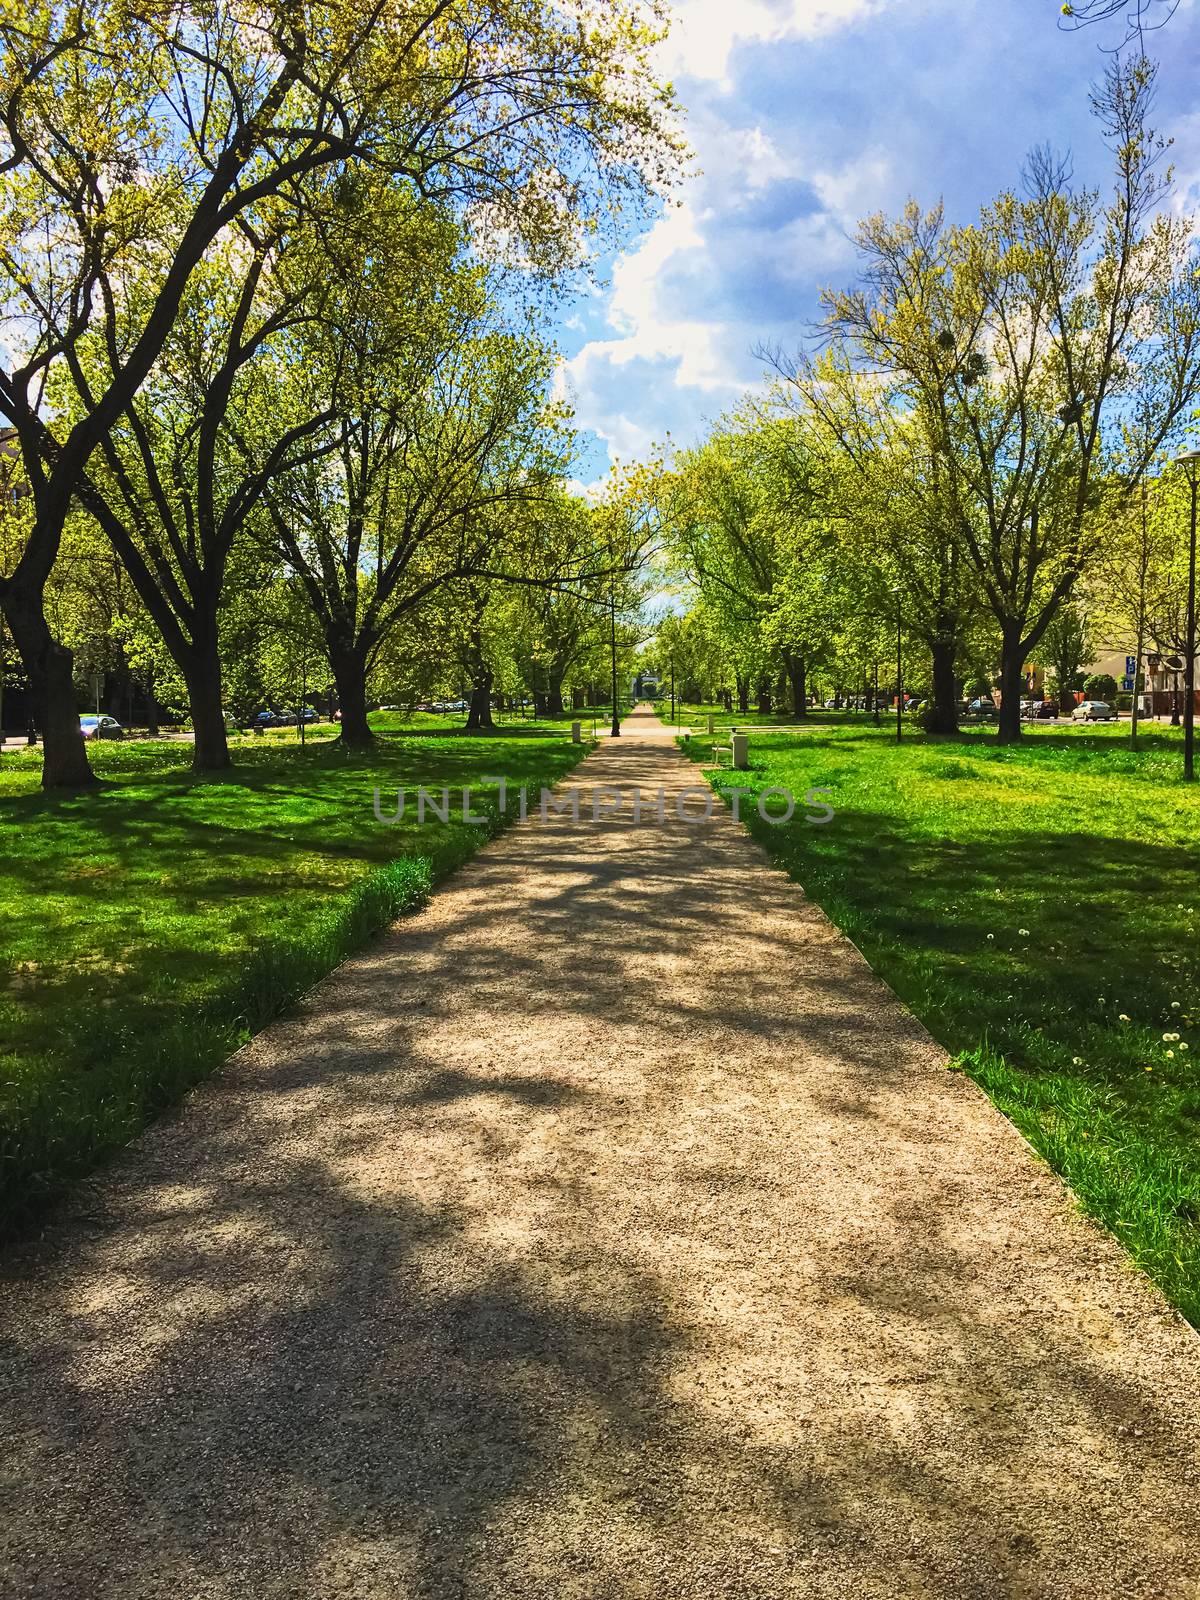 Sunny alley in the city park in spring, nature and outdoor landscape scenery